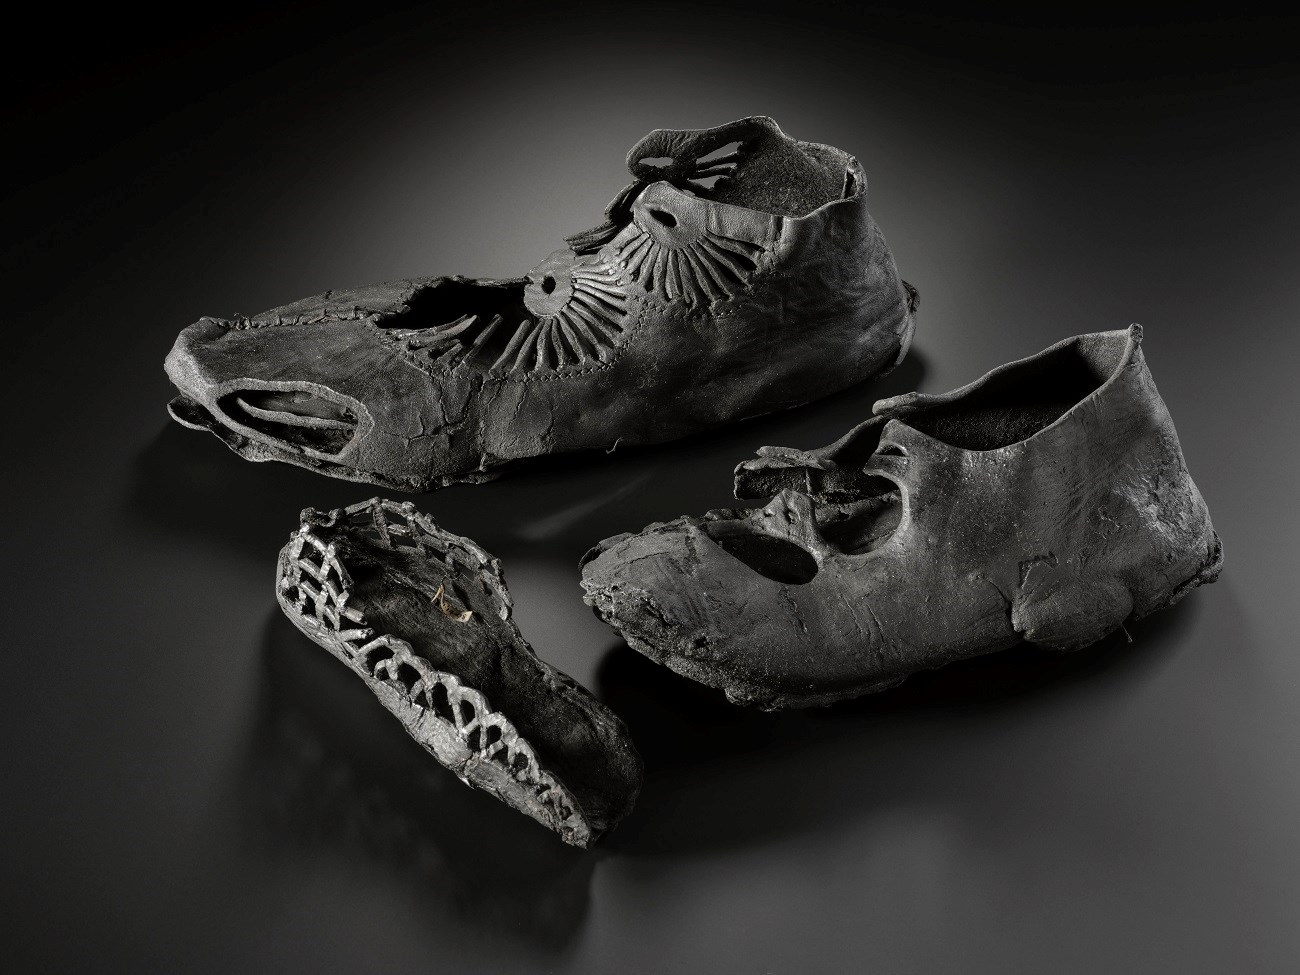 Three shoes on a black background. One is large with a radial pattern of straps, one is medium with less complex straps, and one is small with just the sole surviving.